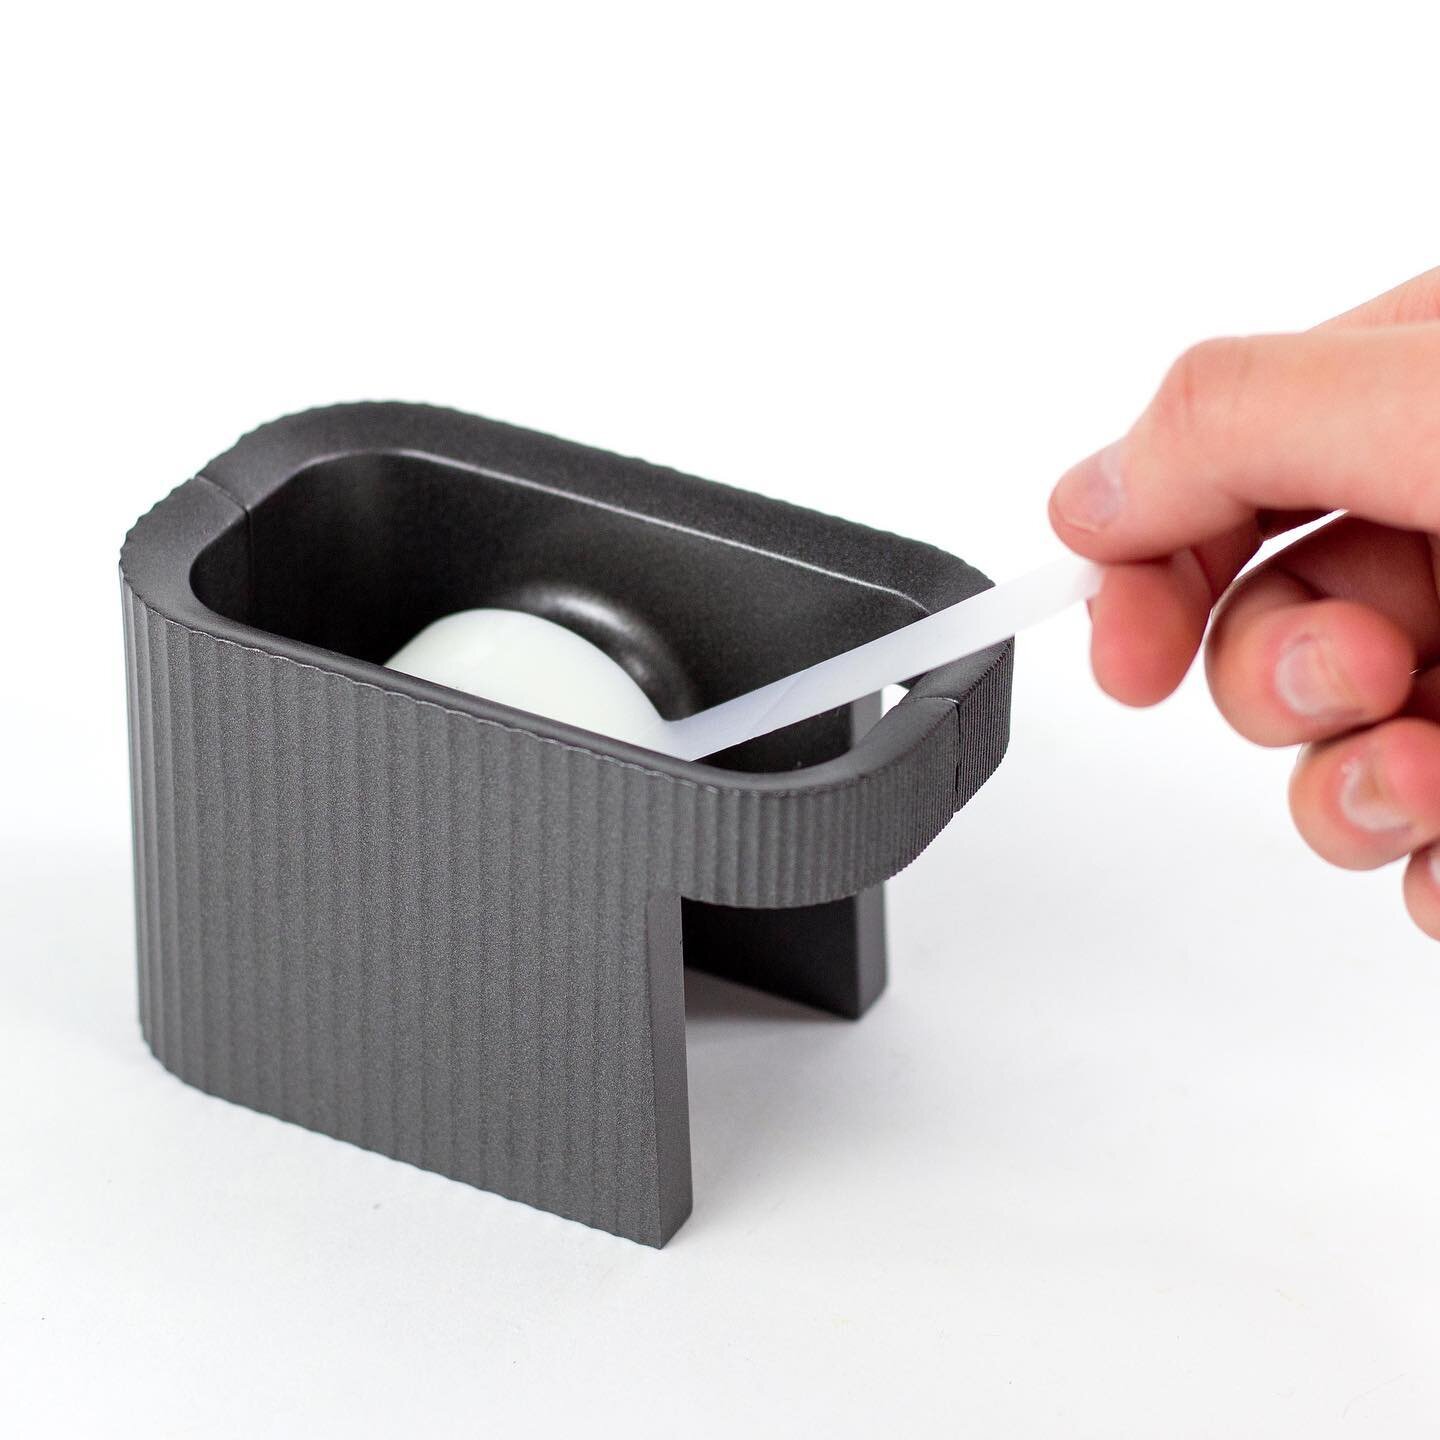 Corru, by Sidona Bradley @sidonart, is a CNC milled tape dispenser that uses a series of interlocking parts and magnets to attach its two sides, allowing for ease of tape replacement. Inspired by corrugated metal, the surface is wrapped with an undul